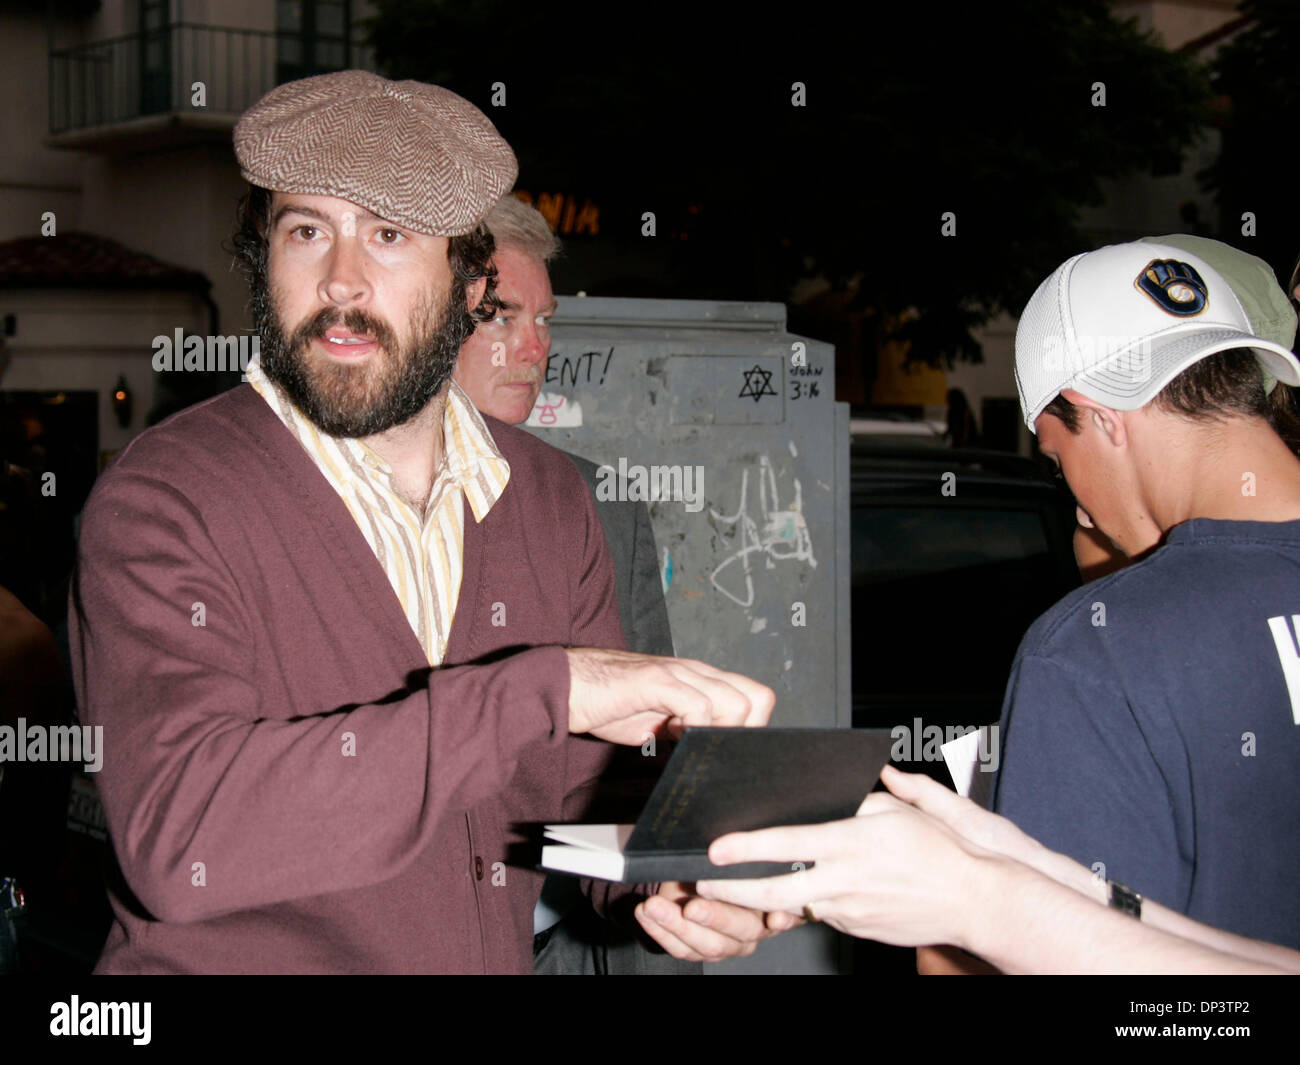 Jul 17, 2006; Westwood, California, USA; Actor JASON LEE at the 'Monster House' Los Angeles Premiere held at the Village Theatre. Mandatory Credit: Photo by Lisa O'Connor/ZUMA Press. (©) Copyright 2006 by Lisa O'Connor Stock Photo